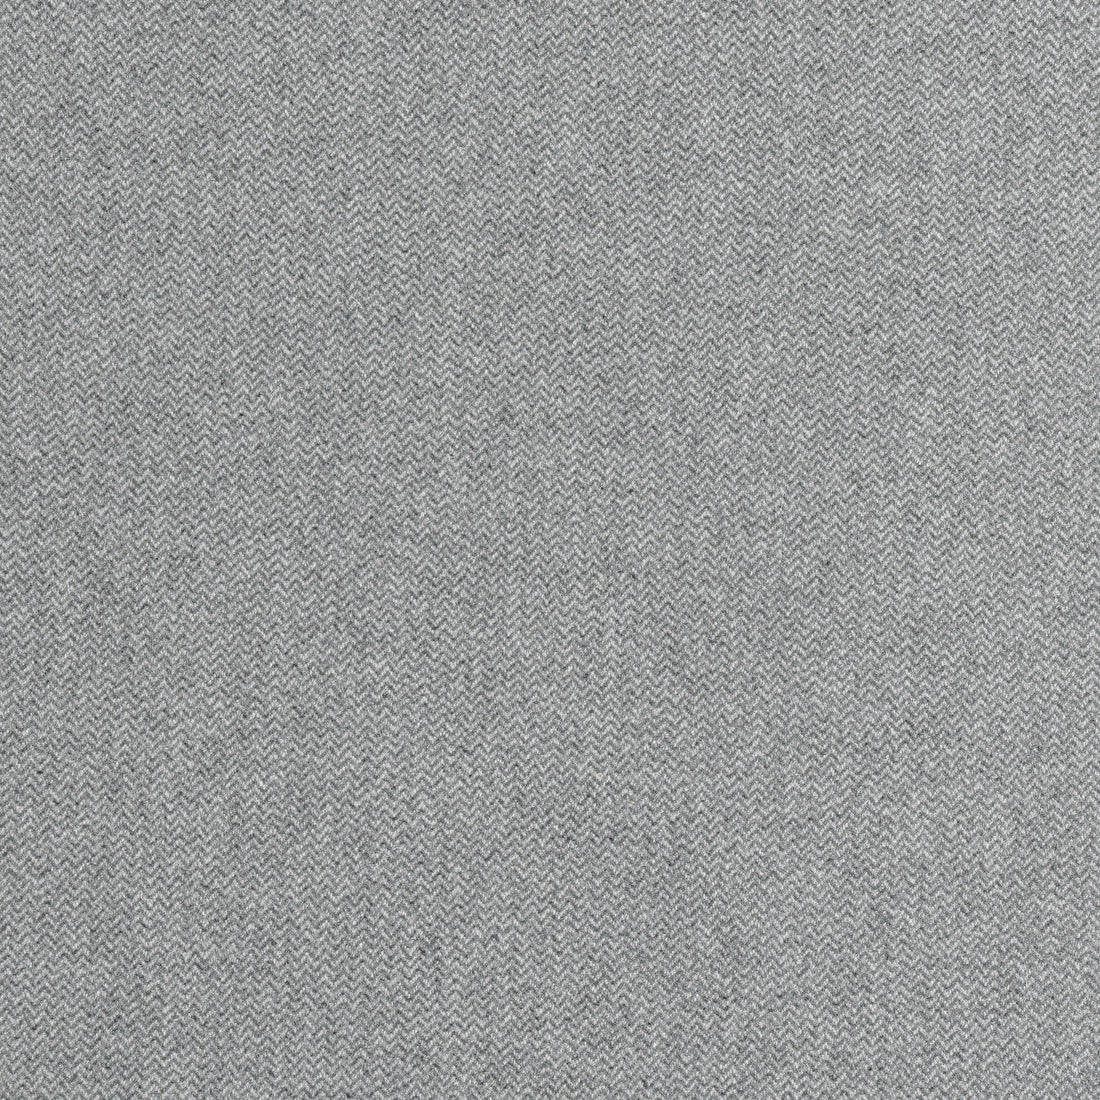 Dorset fabric in zinc color - pattern number W80916 - by Thibaut in the Dunmore collection